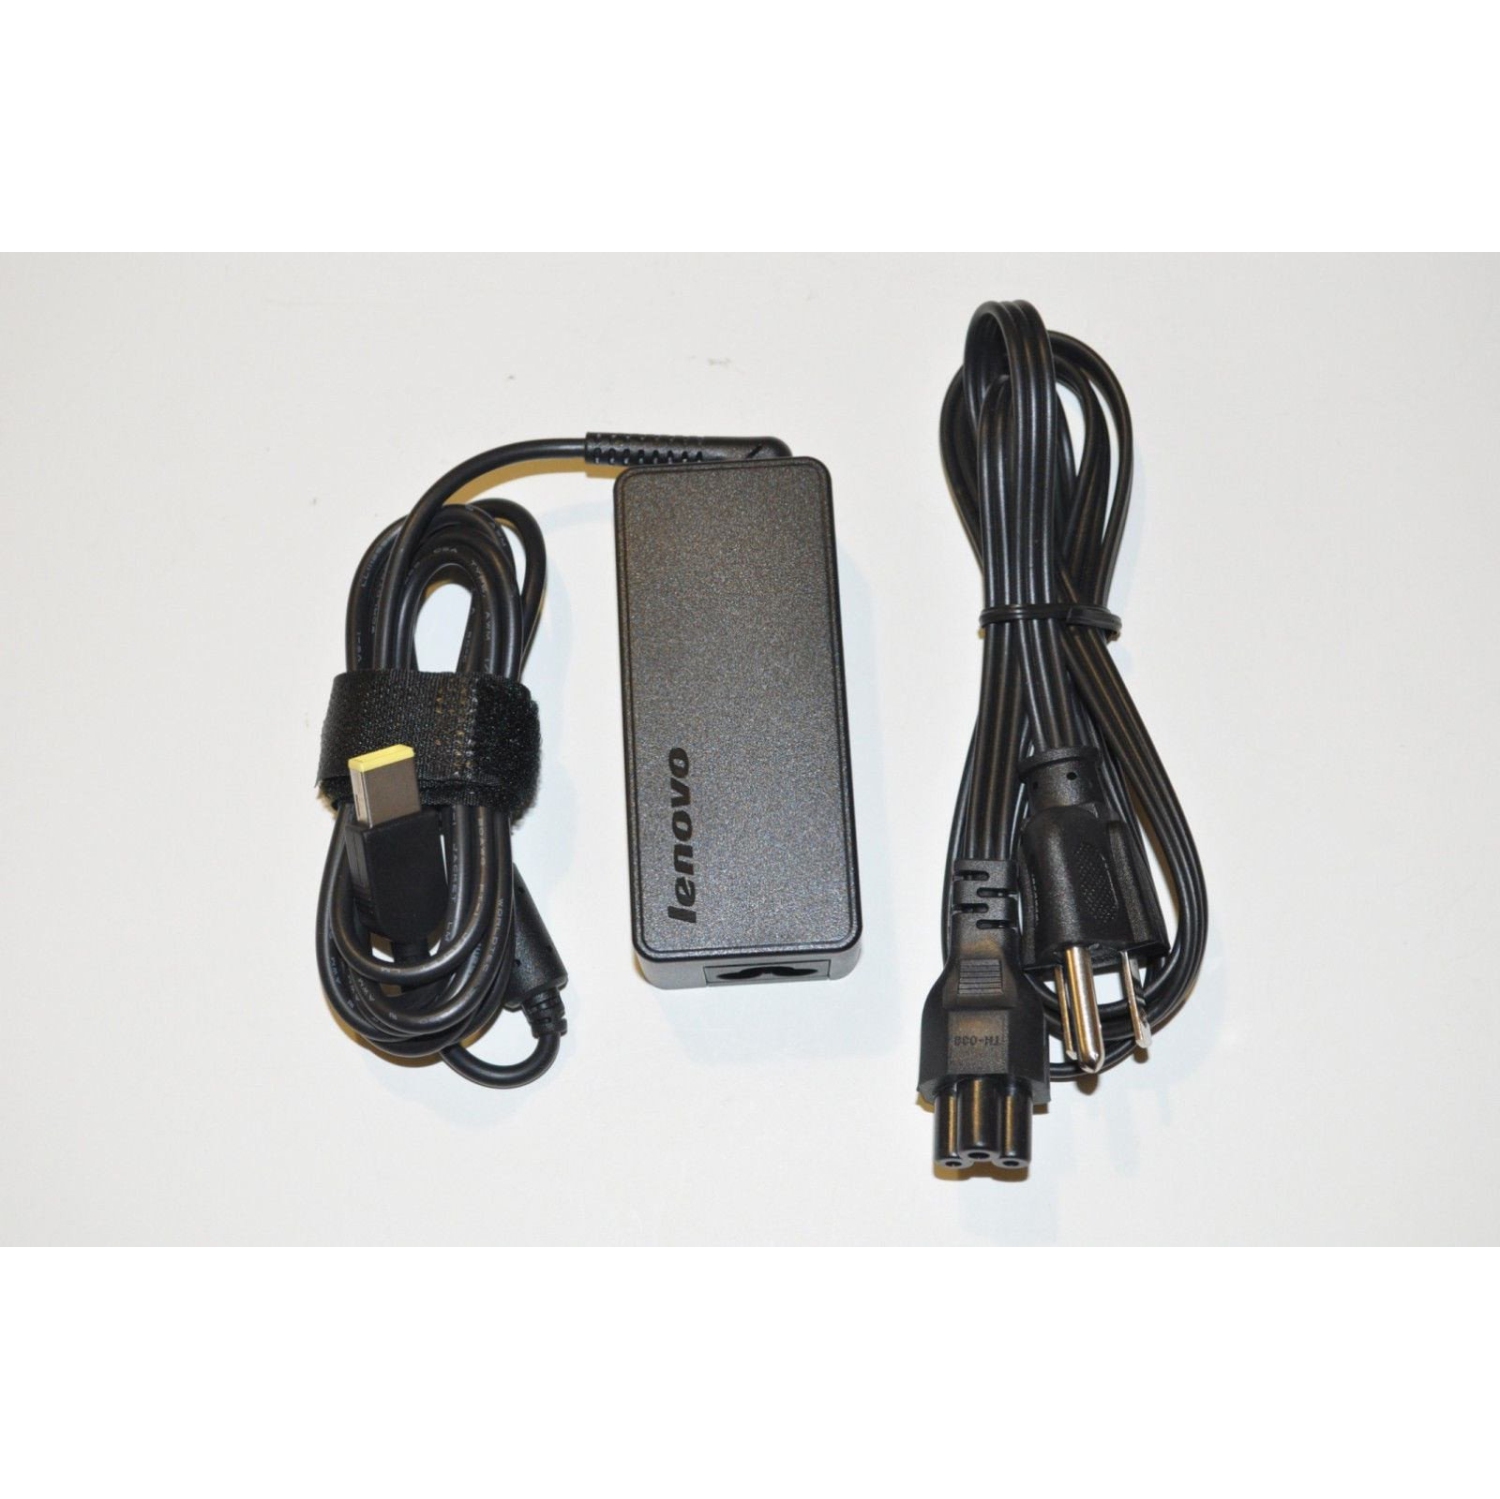 New Genuine Lenovo Yoga 910 AC Adapter Charger ADL135NDC2A 45W